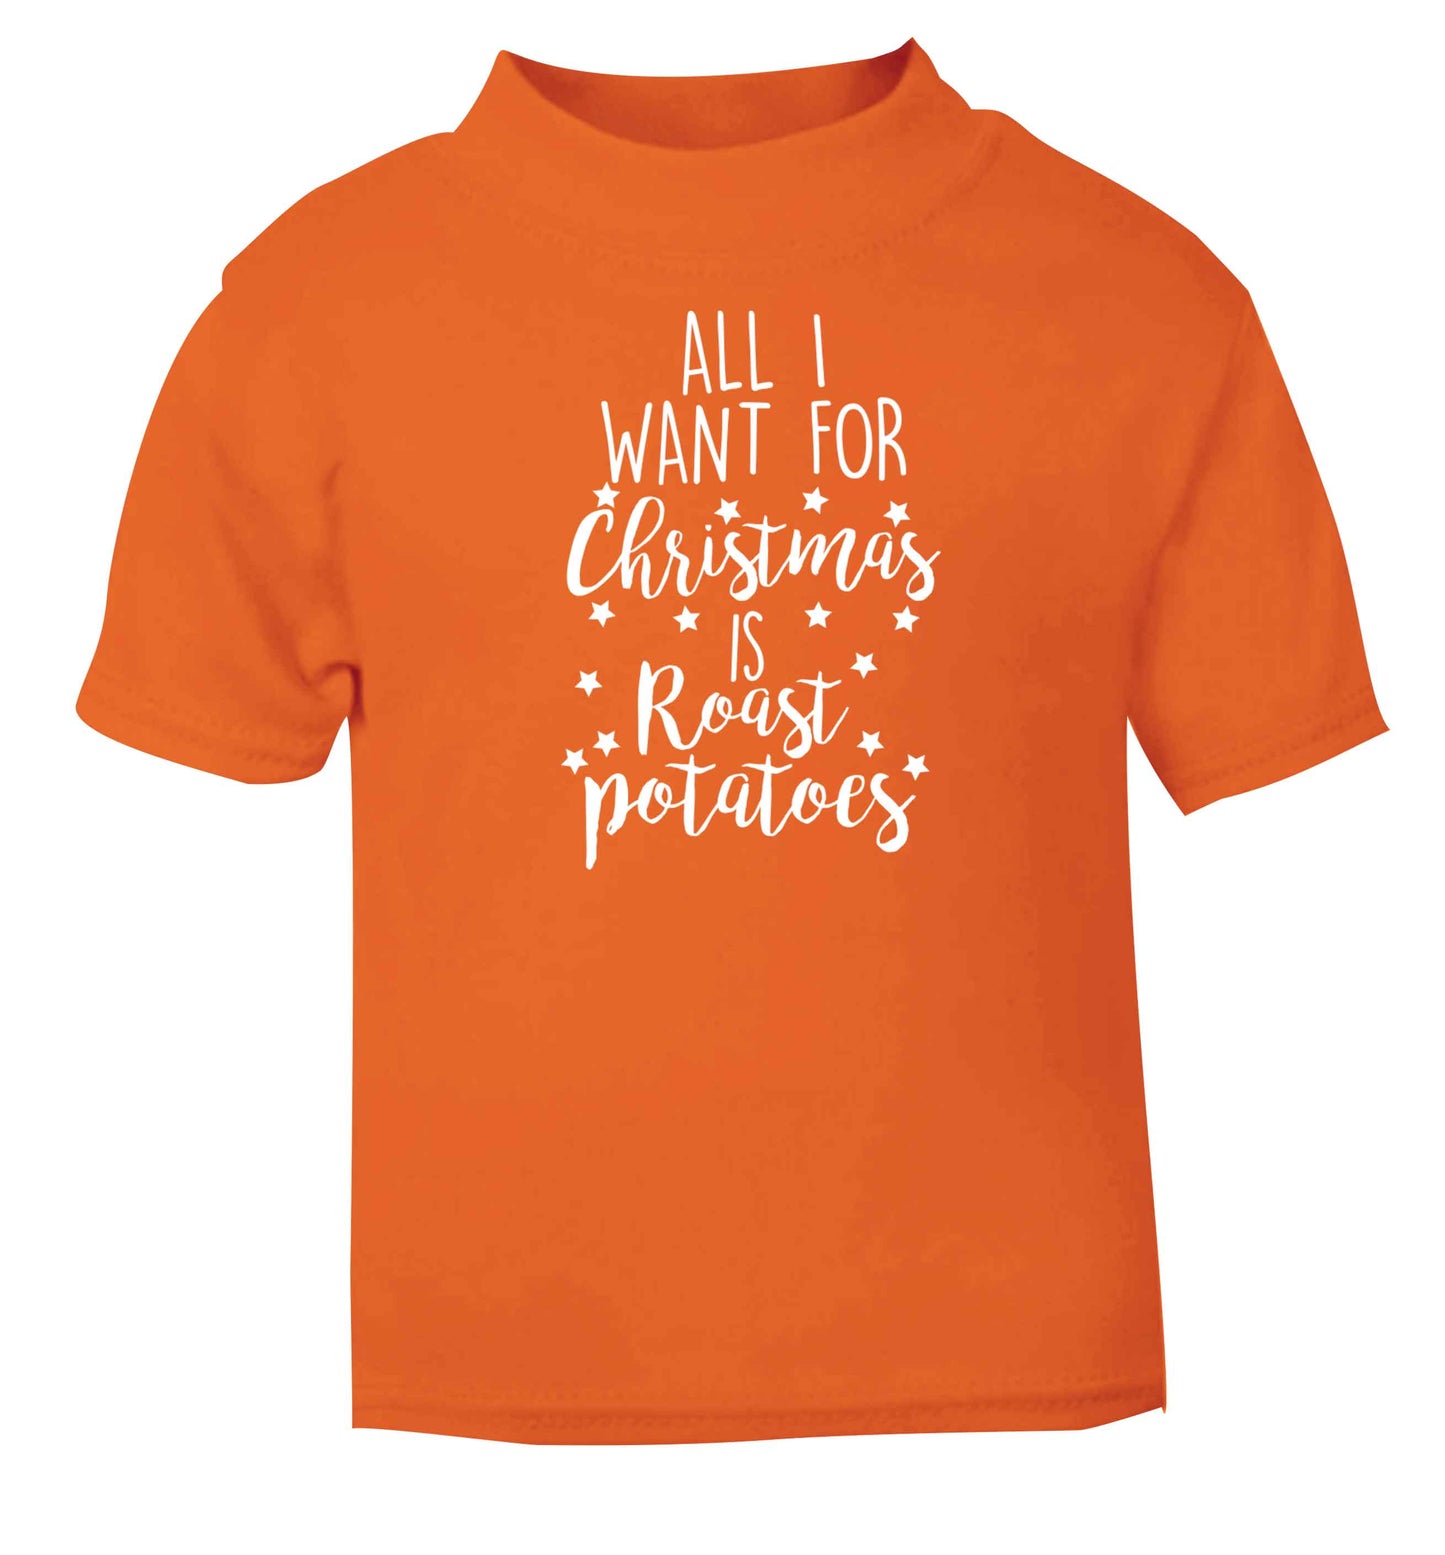 All I want for Christmas is roast potatoes orange baby toddler Tshirt 2 Years